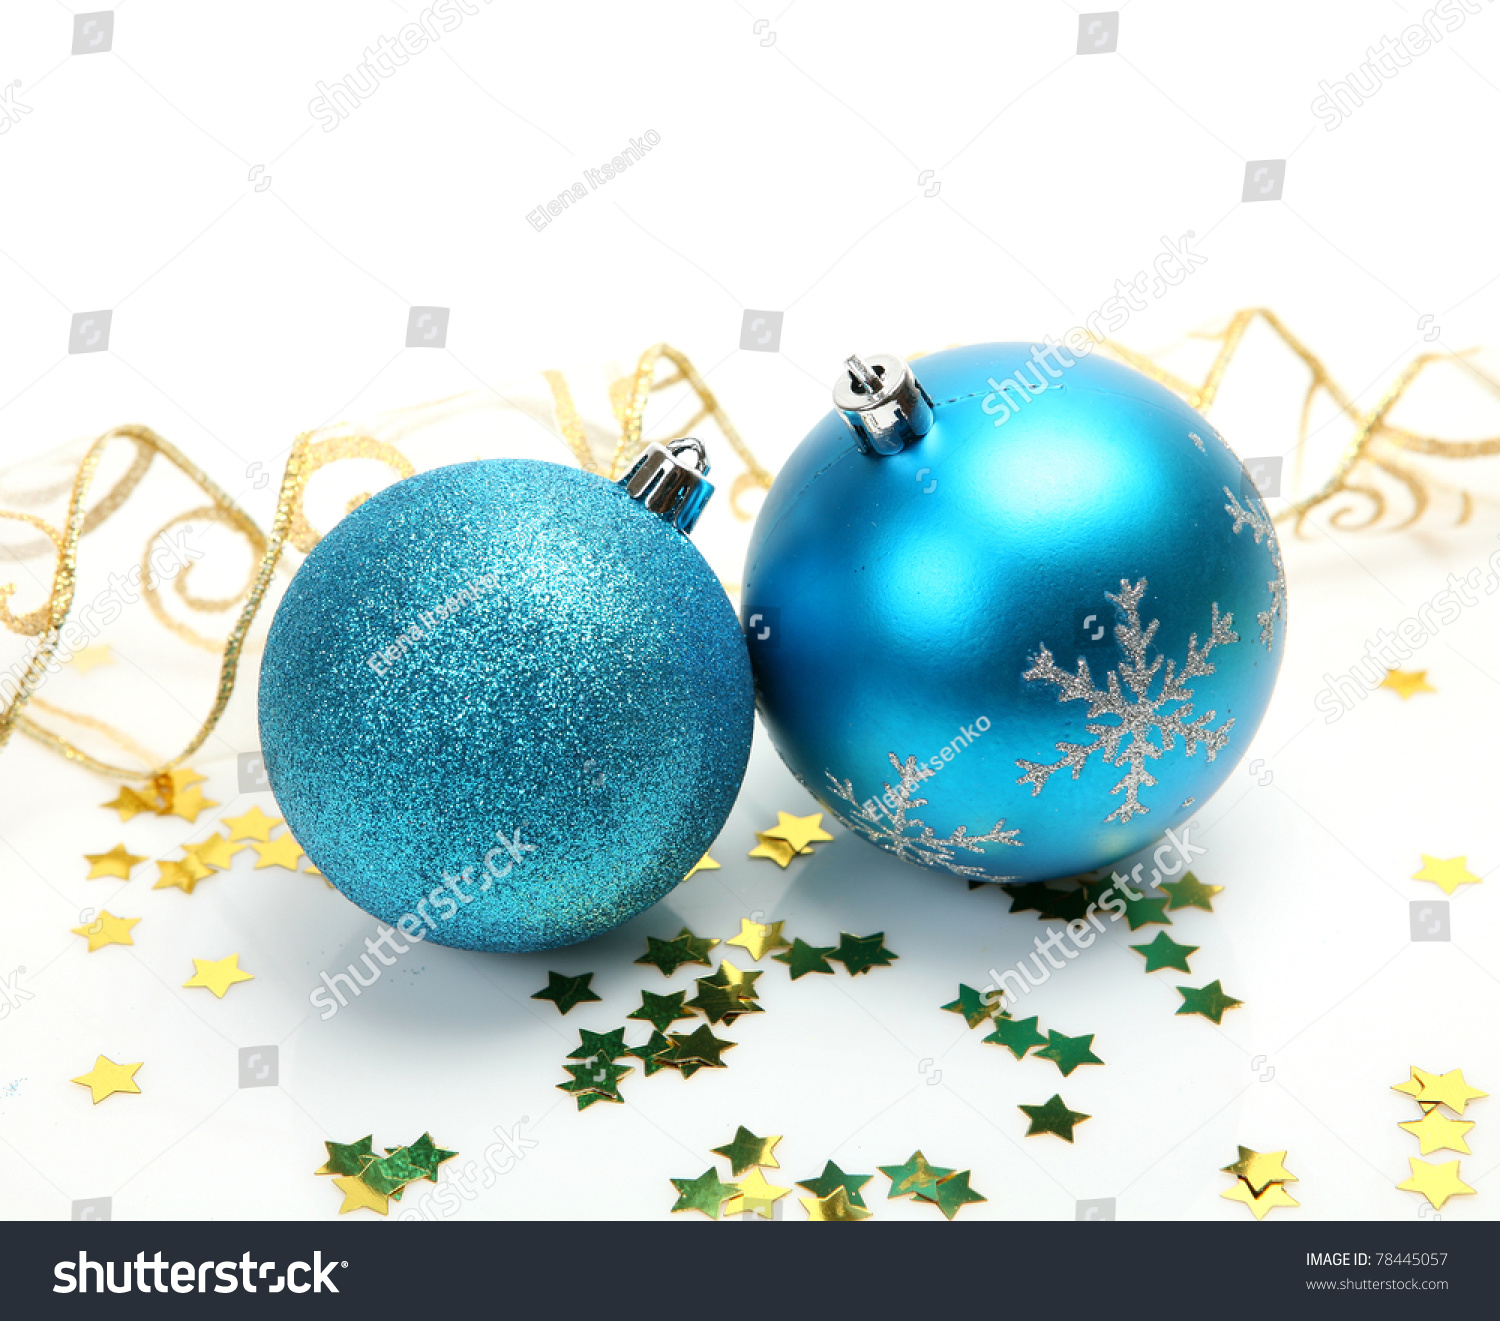 New Years Ornaments Stock Photo 78445057 - Shutterstock